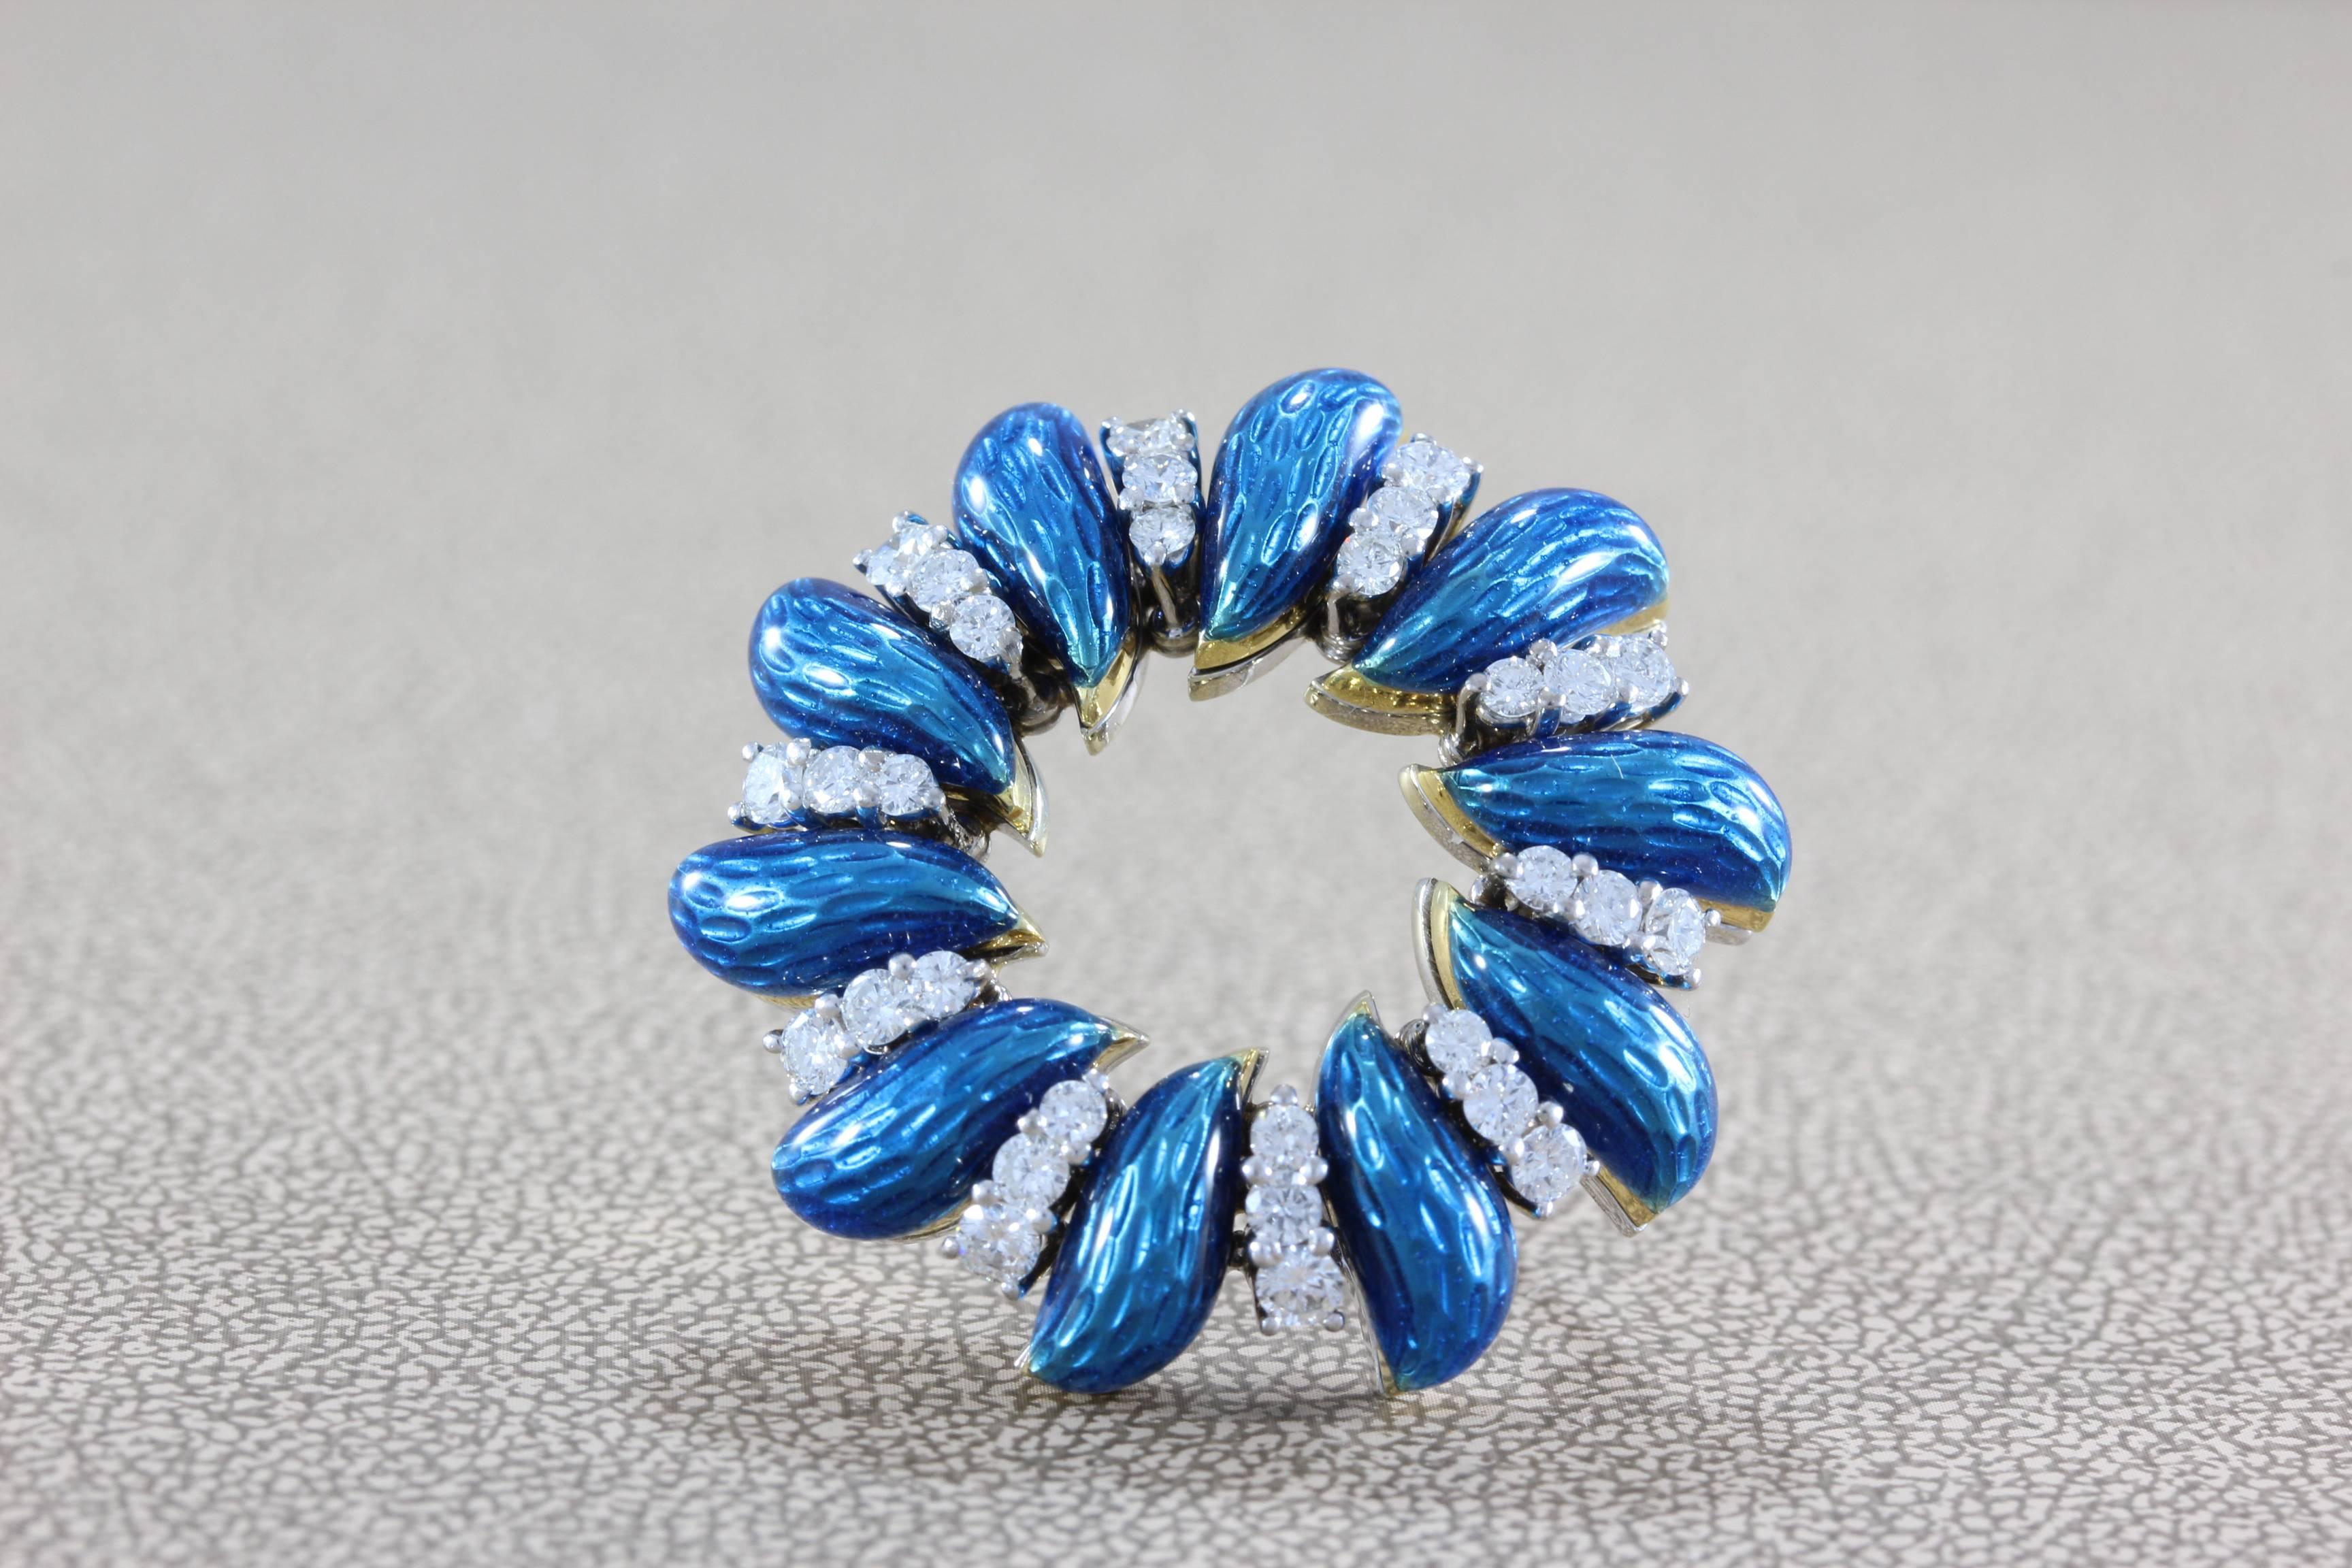 A classic piece by Tiffany & Company, this wreath brooch features 30 VVS quality full-cut diamonds, approximately 1.25 carat, accented by vivid blue enamel. The wreath is made in 18K white gold and signed Tiffany & Co Italy. 

Dimensions: 1.25 x